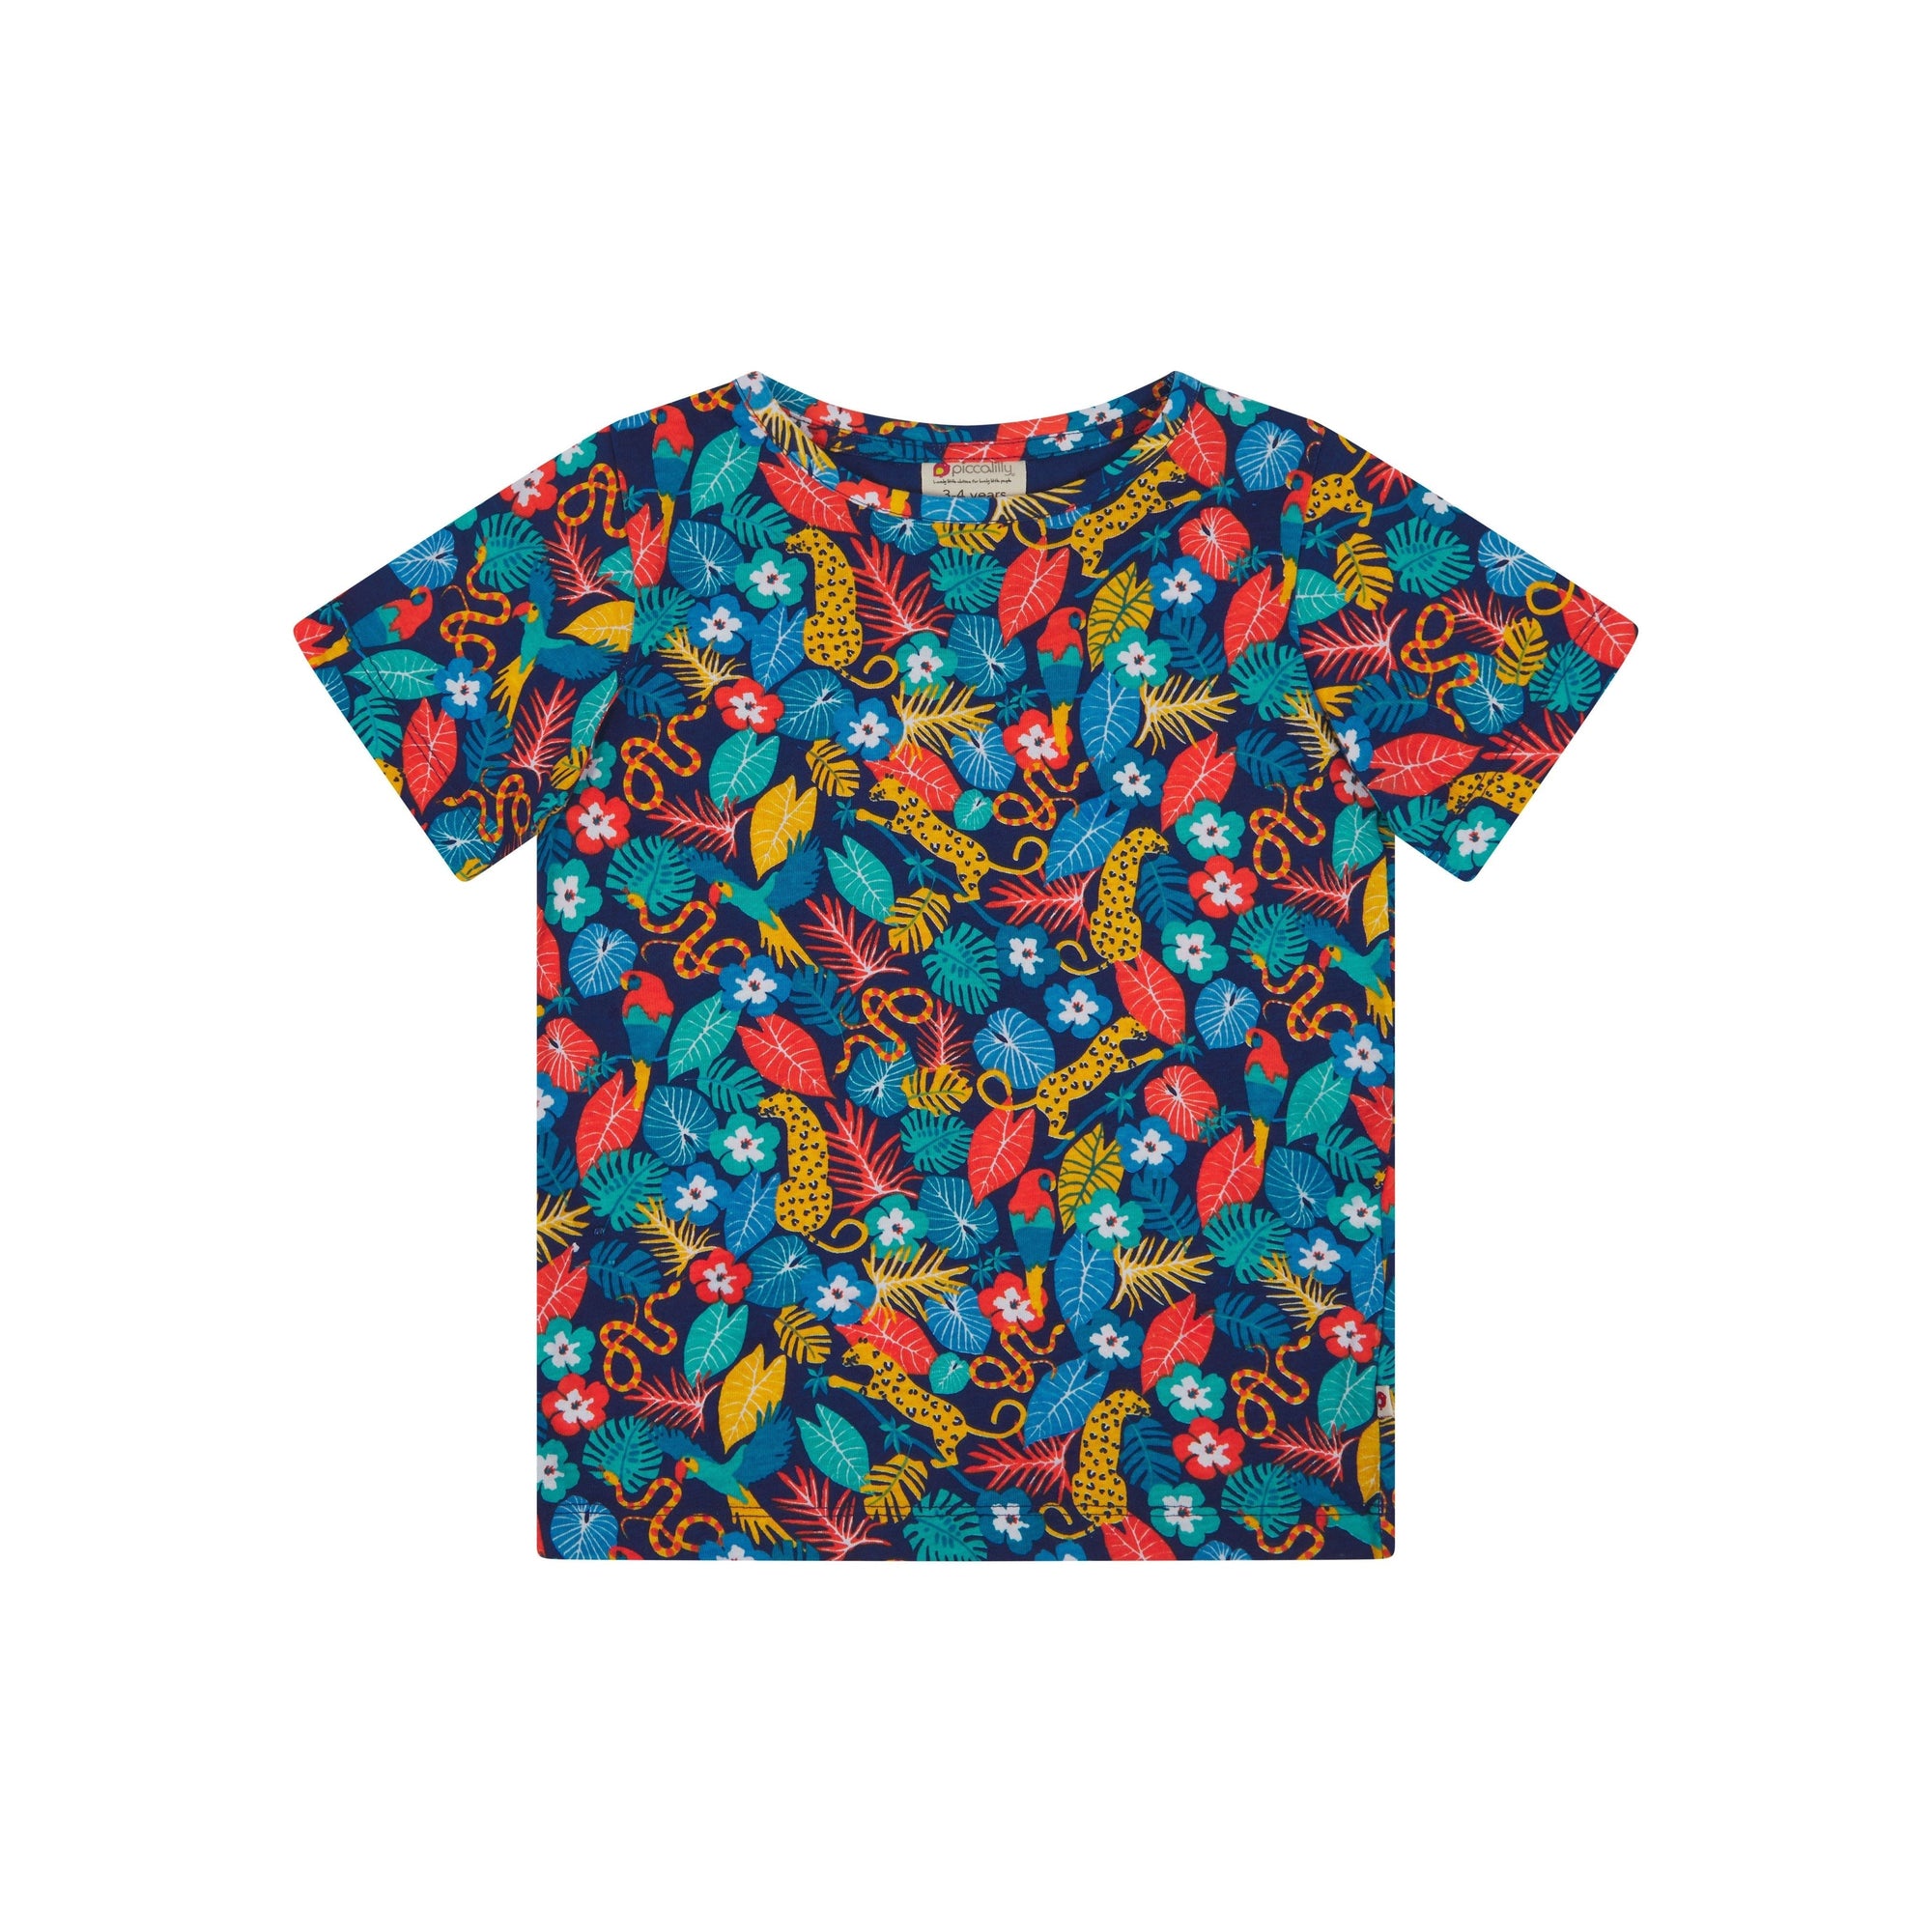 Tropic Short Sleeve Shirt - 1 Left Size 6-7 years-Piccalilly-Modern Rascals